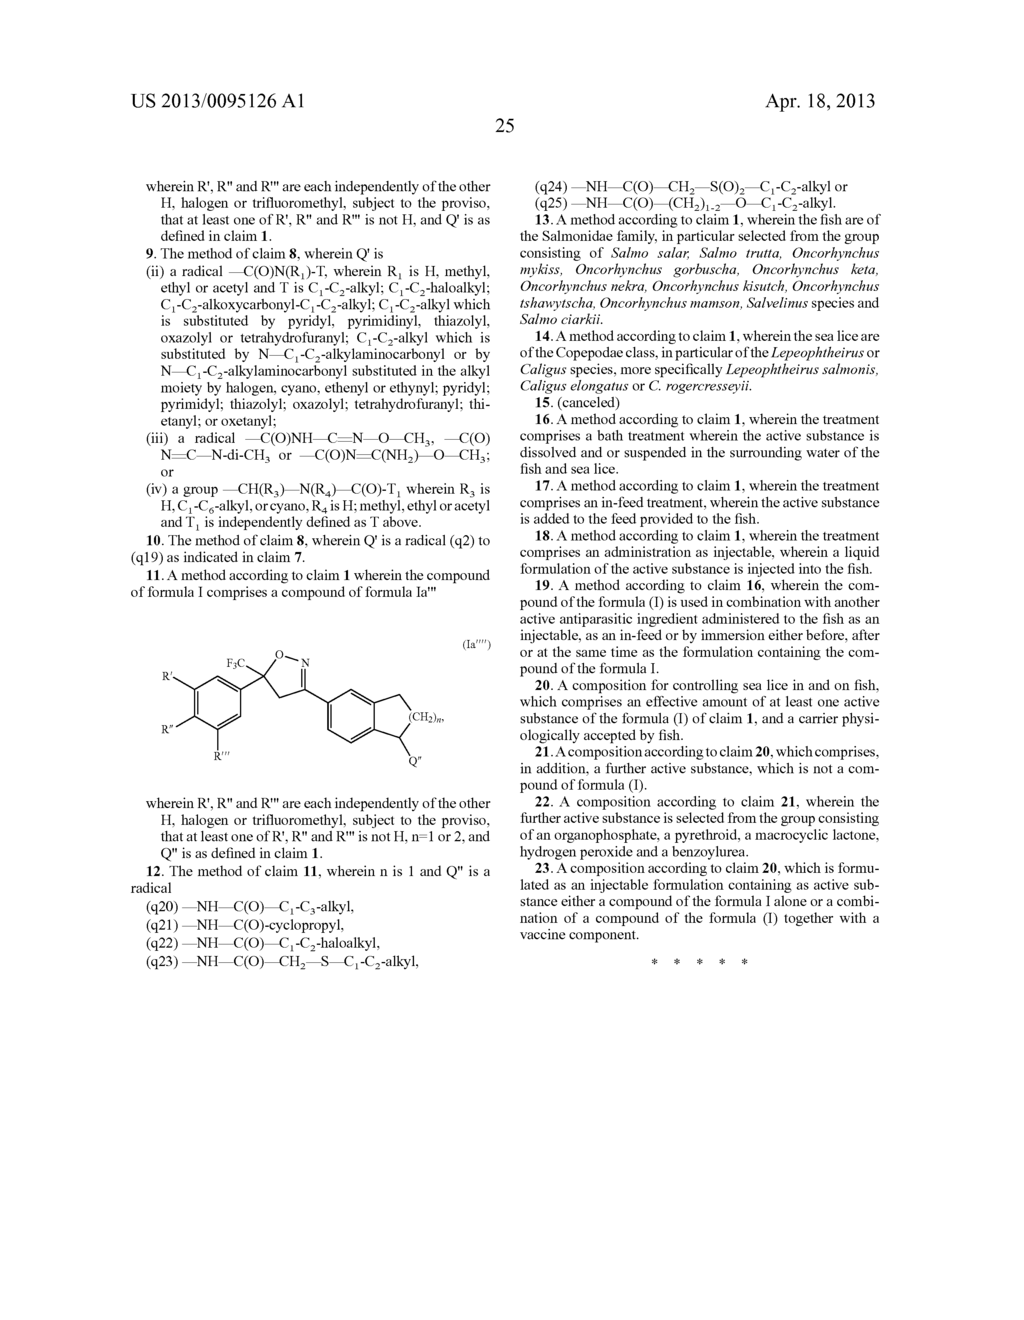 USE OF SUBSTITUTED HETEROCYCLIC COMPOUNDS TO CONTROL SEA LICE ON FISH - diagram, schematic, and image 26